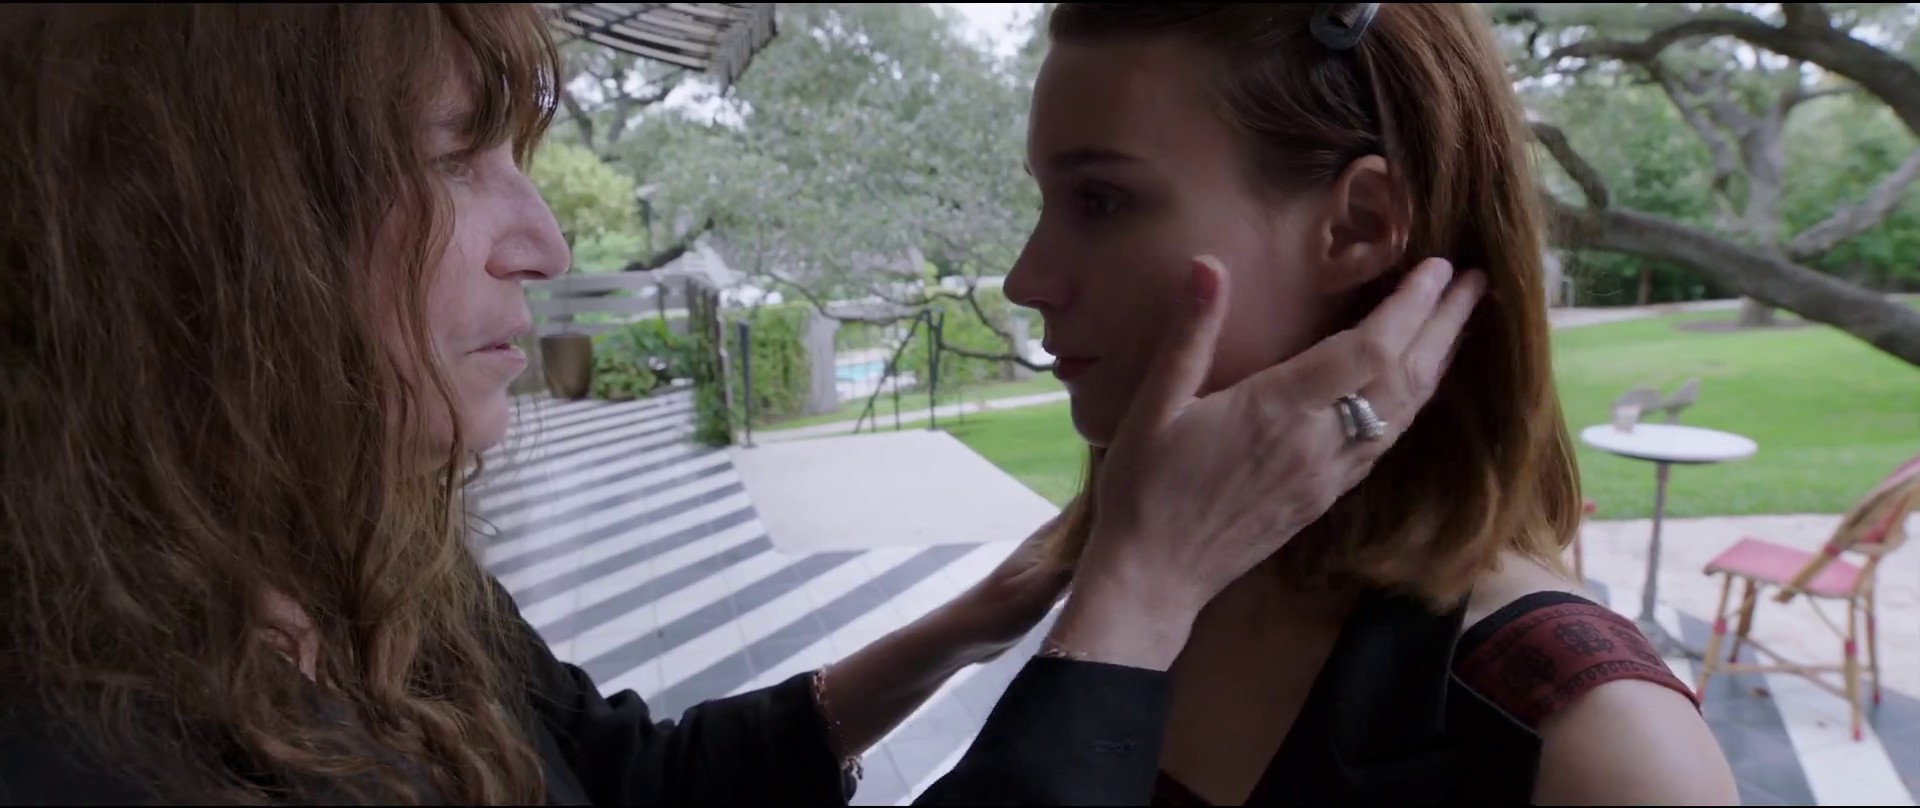 Patti Smith / Rooney Mara | Song to Song | Terrence Malick